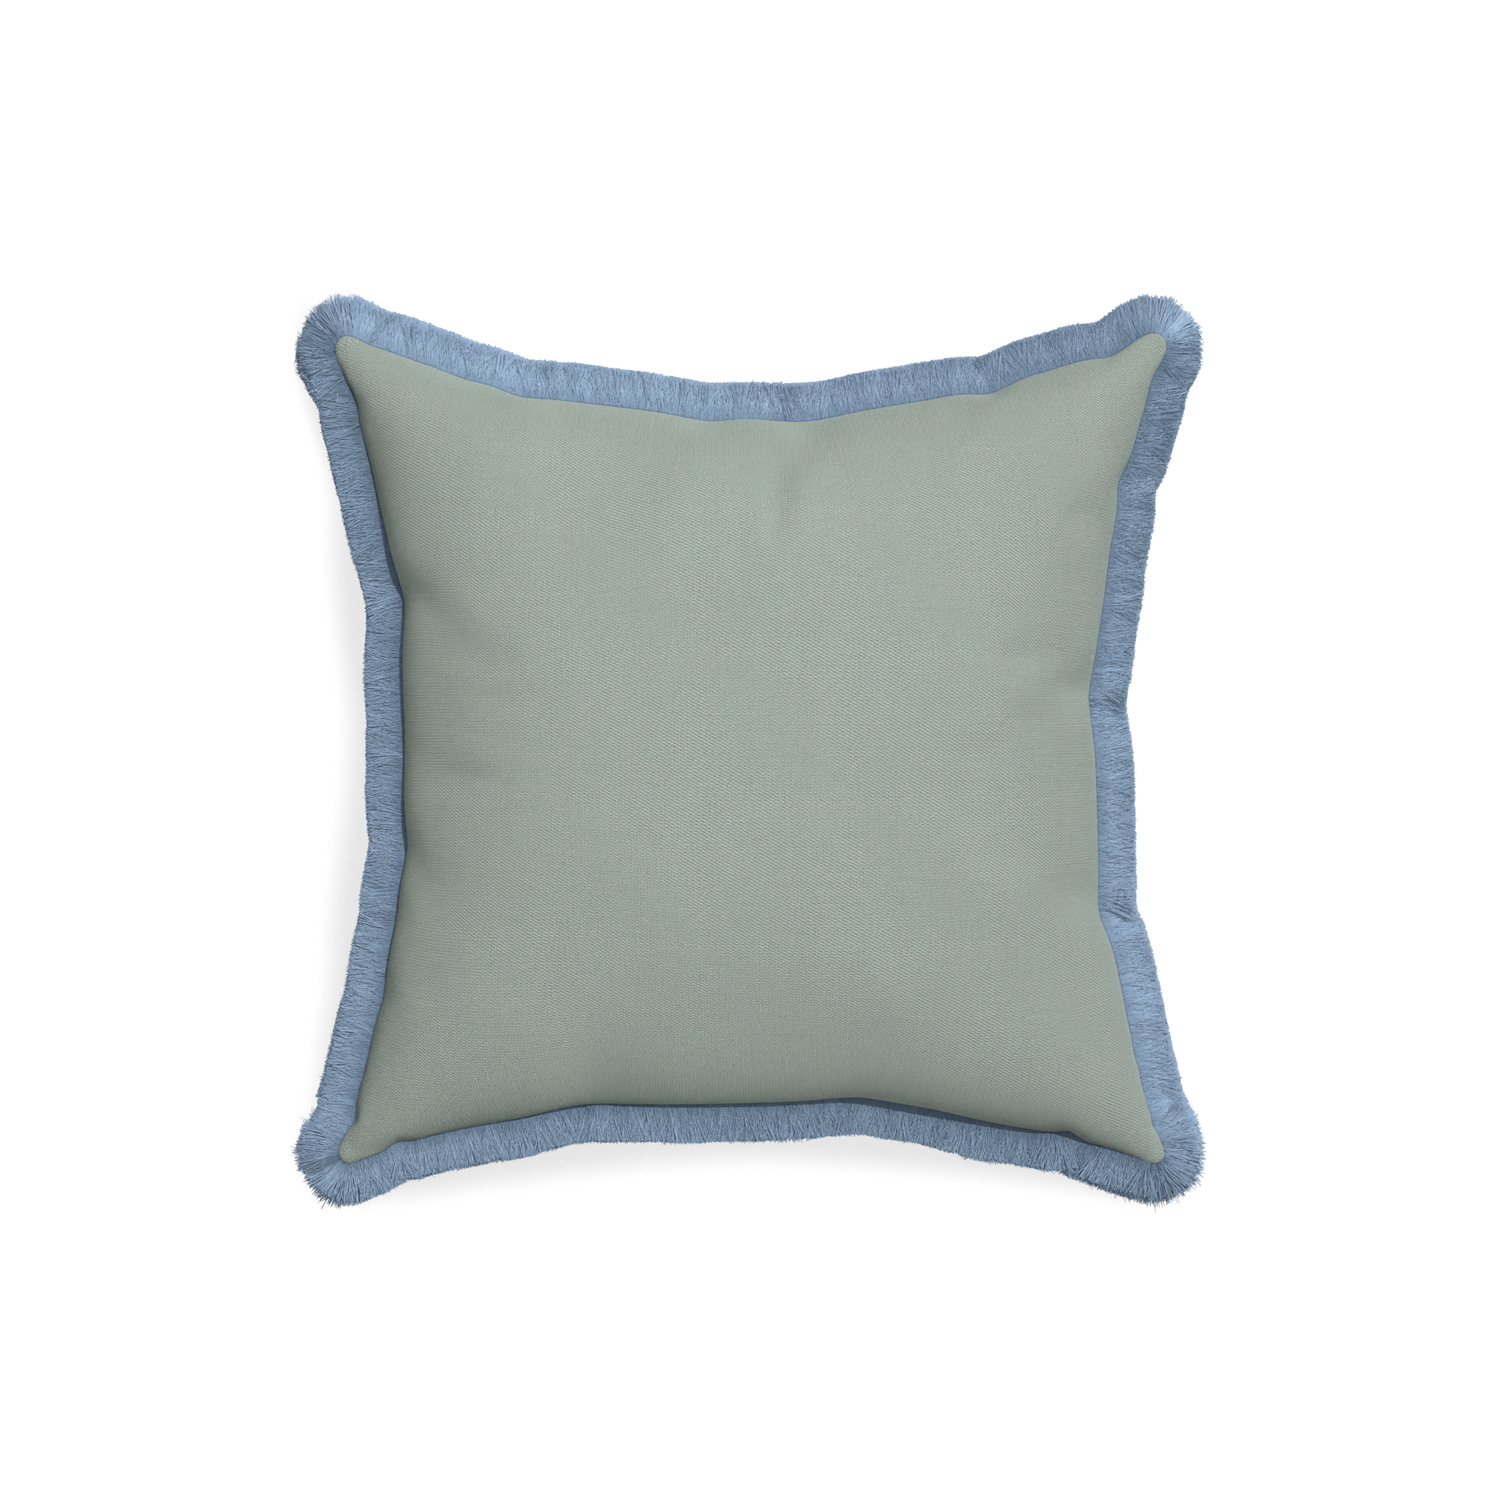 18-square sage custom sage green cottonpillow with sky fringe on white background